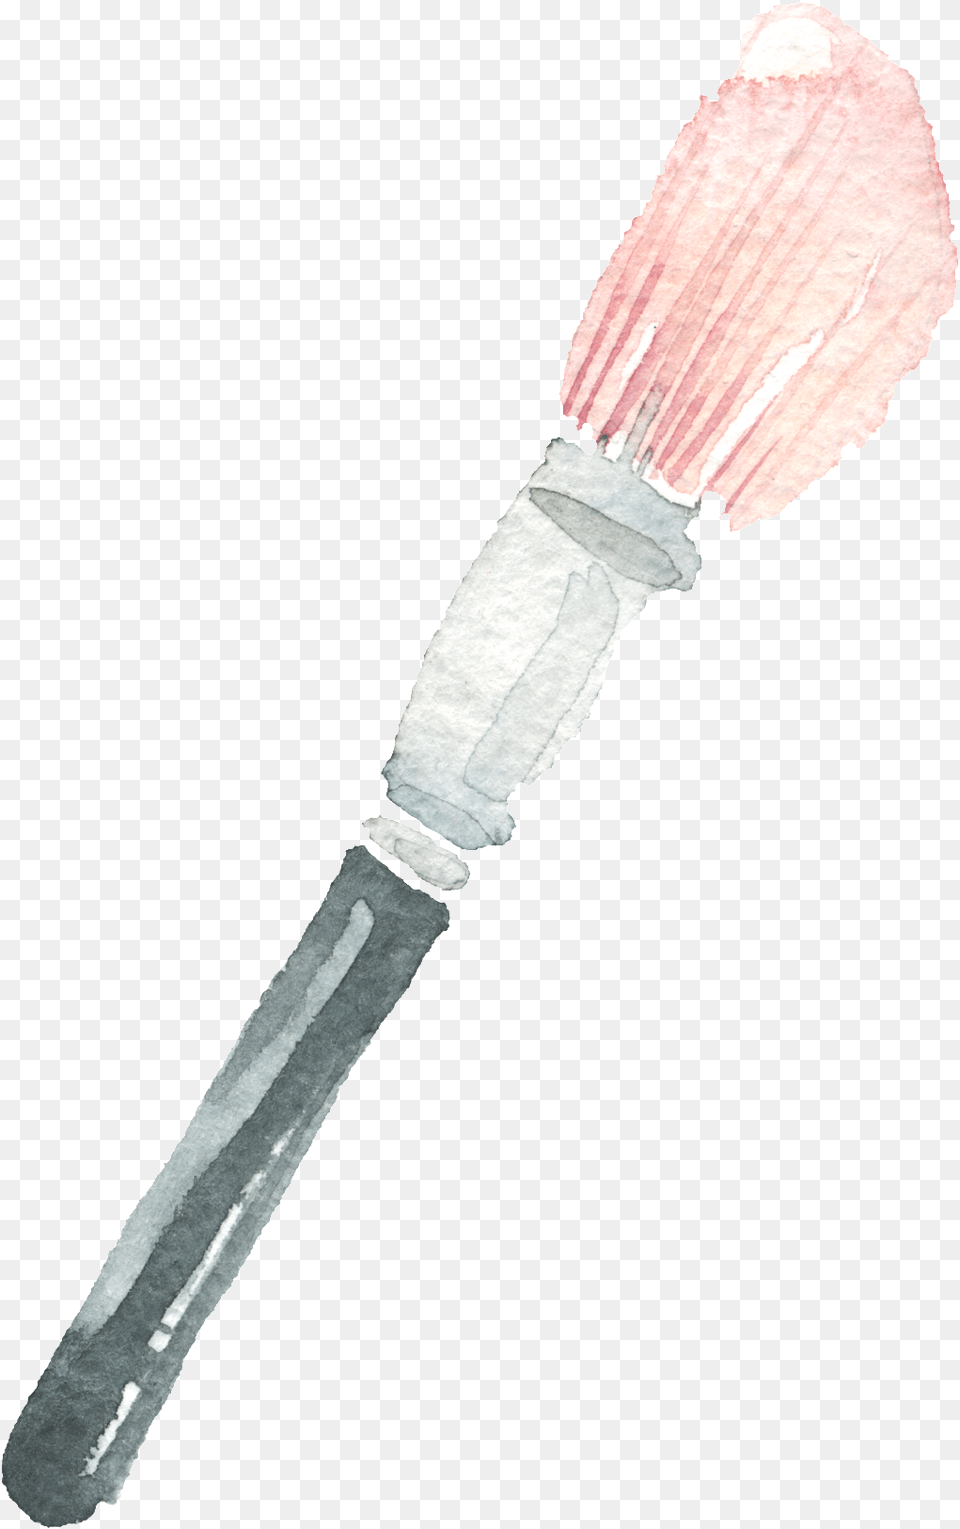 This Photos Is Brush About Hand Painted Illustrations Watercolor Painting, Device, Tool, Blade, Dagger Png